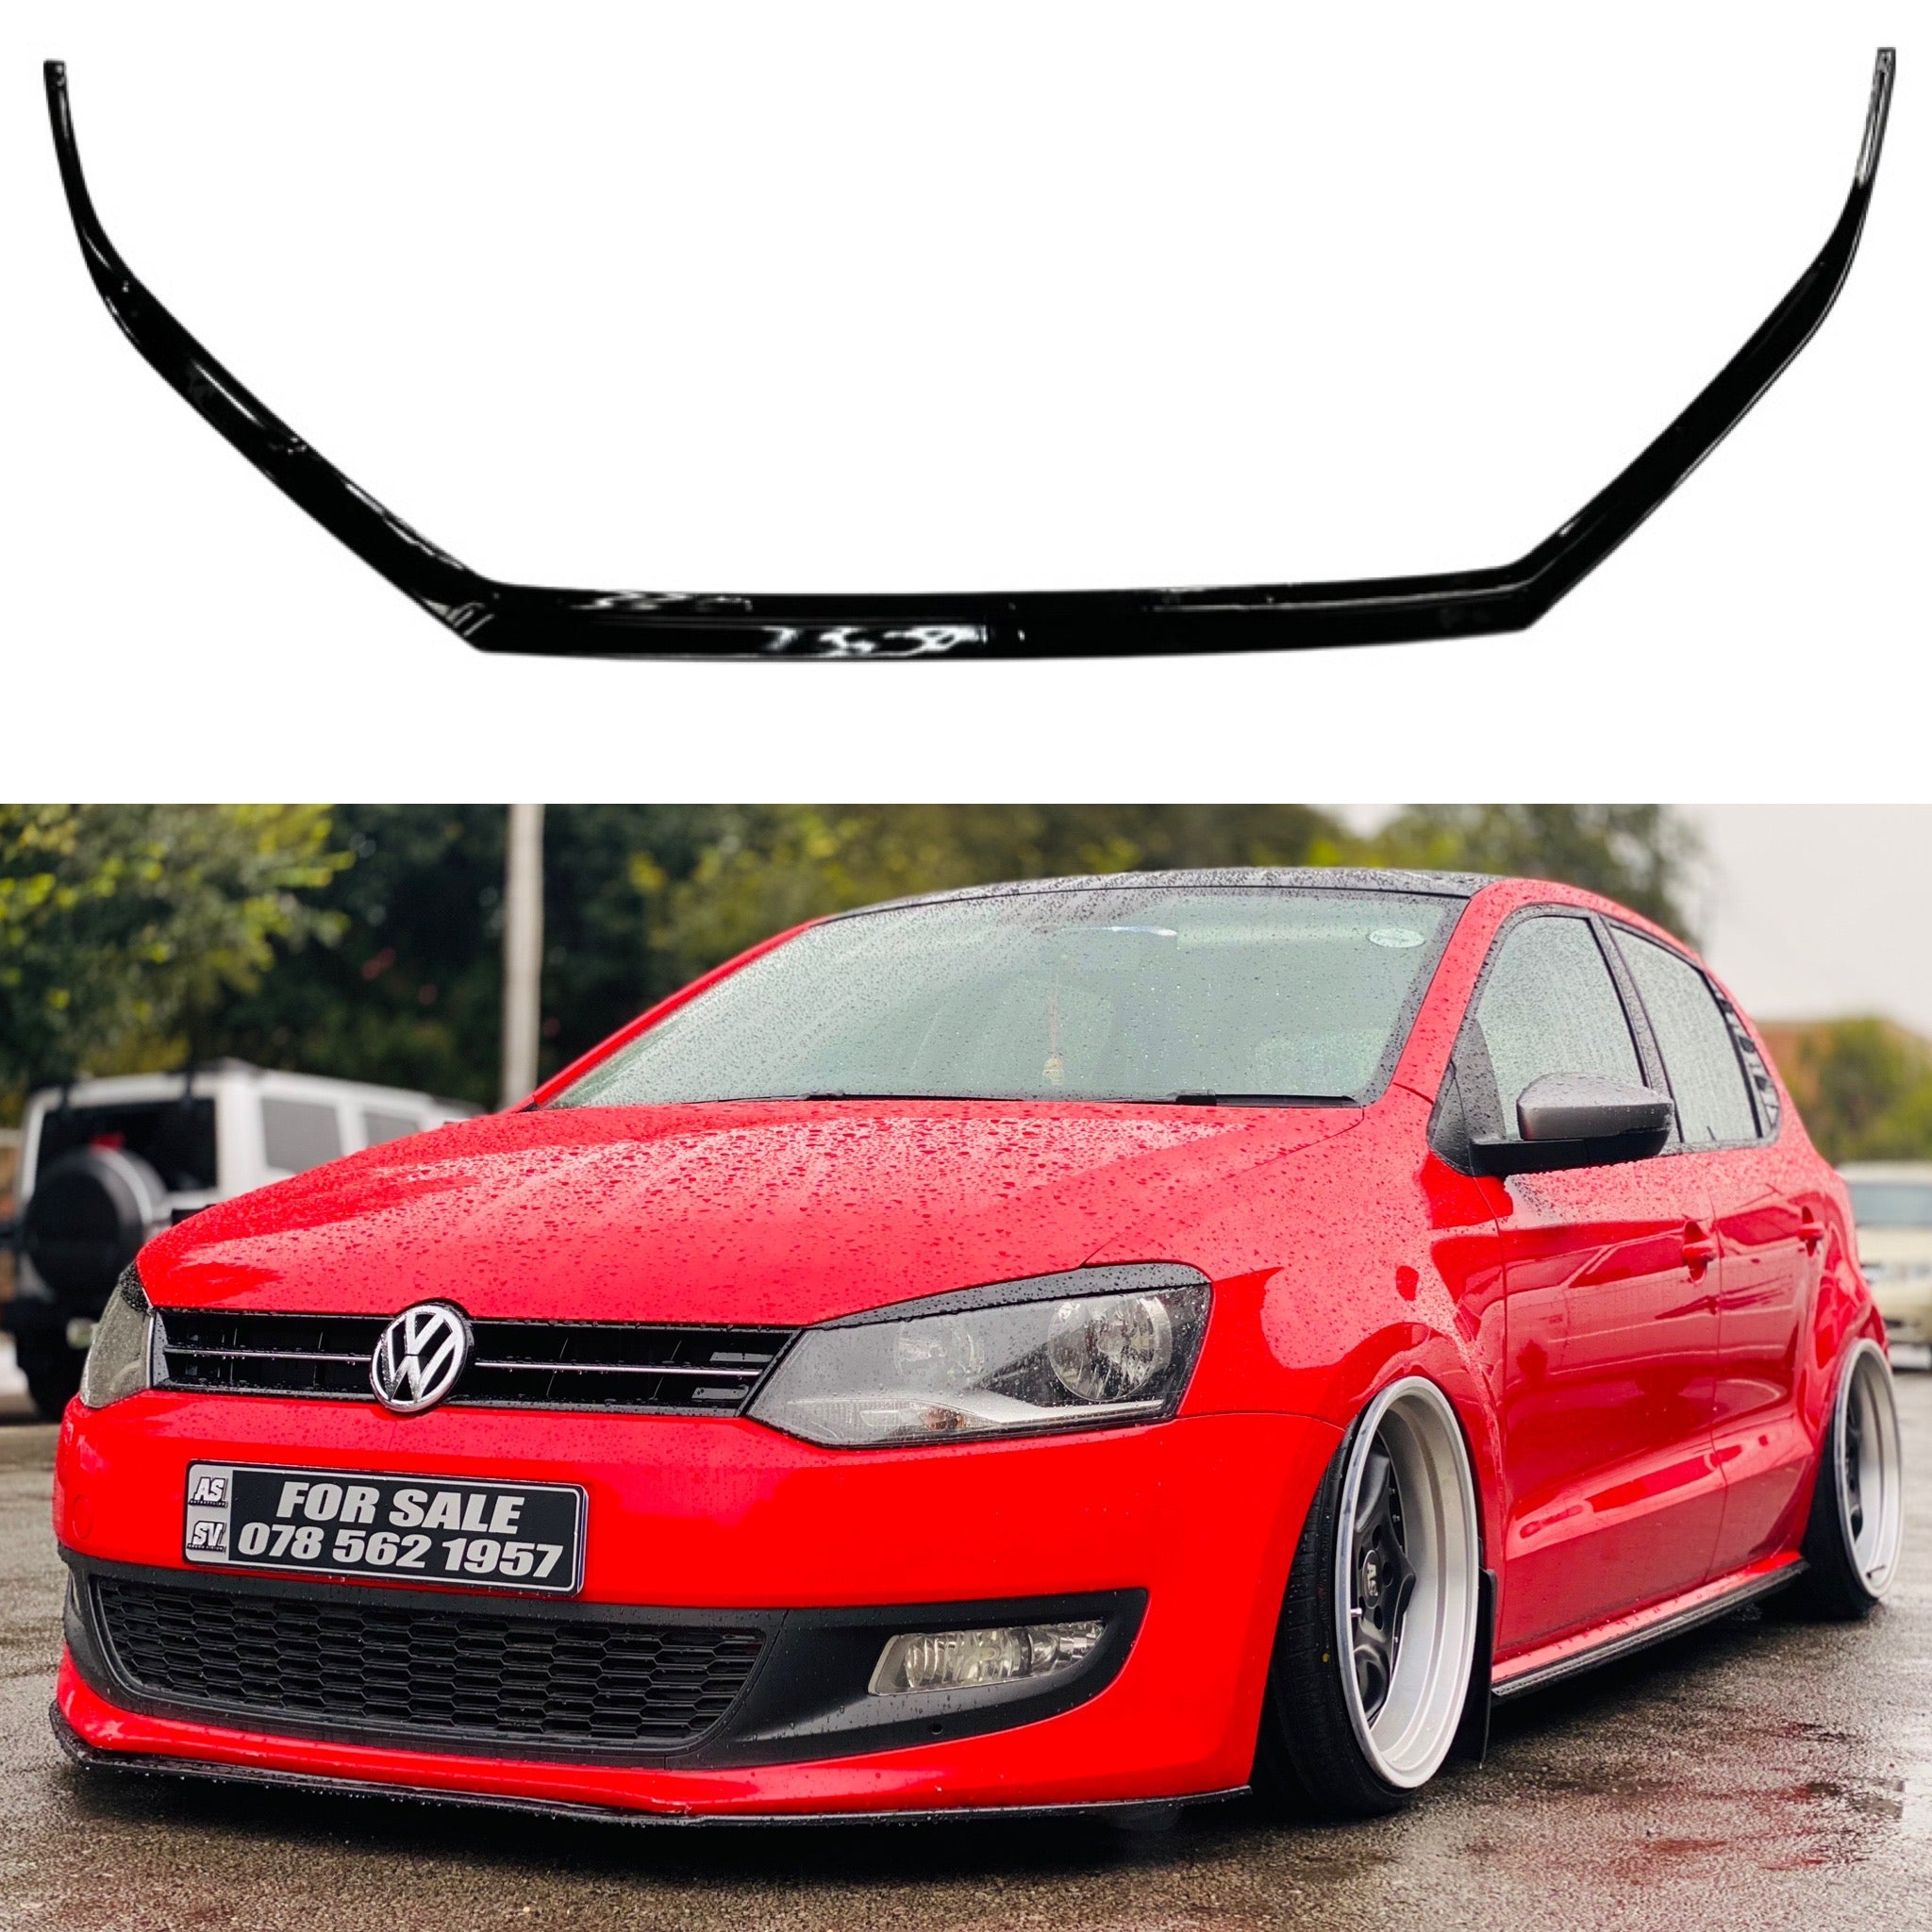 VW Polo 6 Kerscher Front Lip With Red Detail - Auto Customs